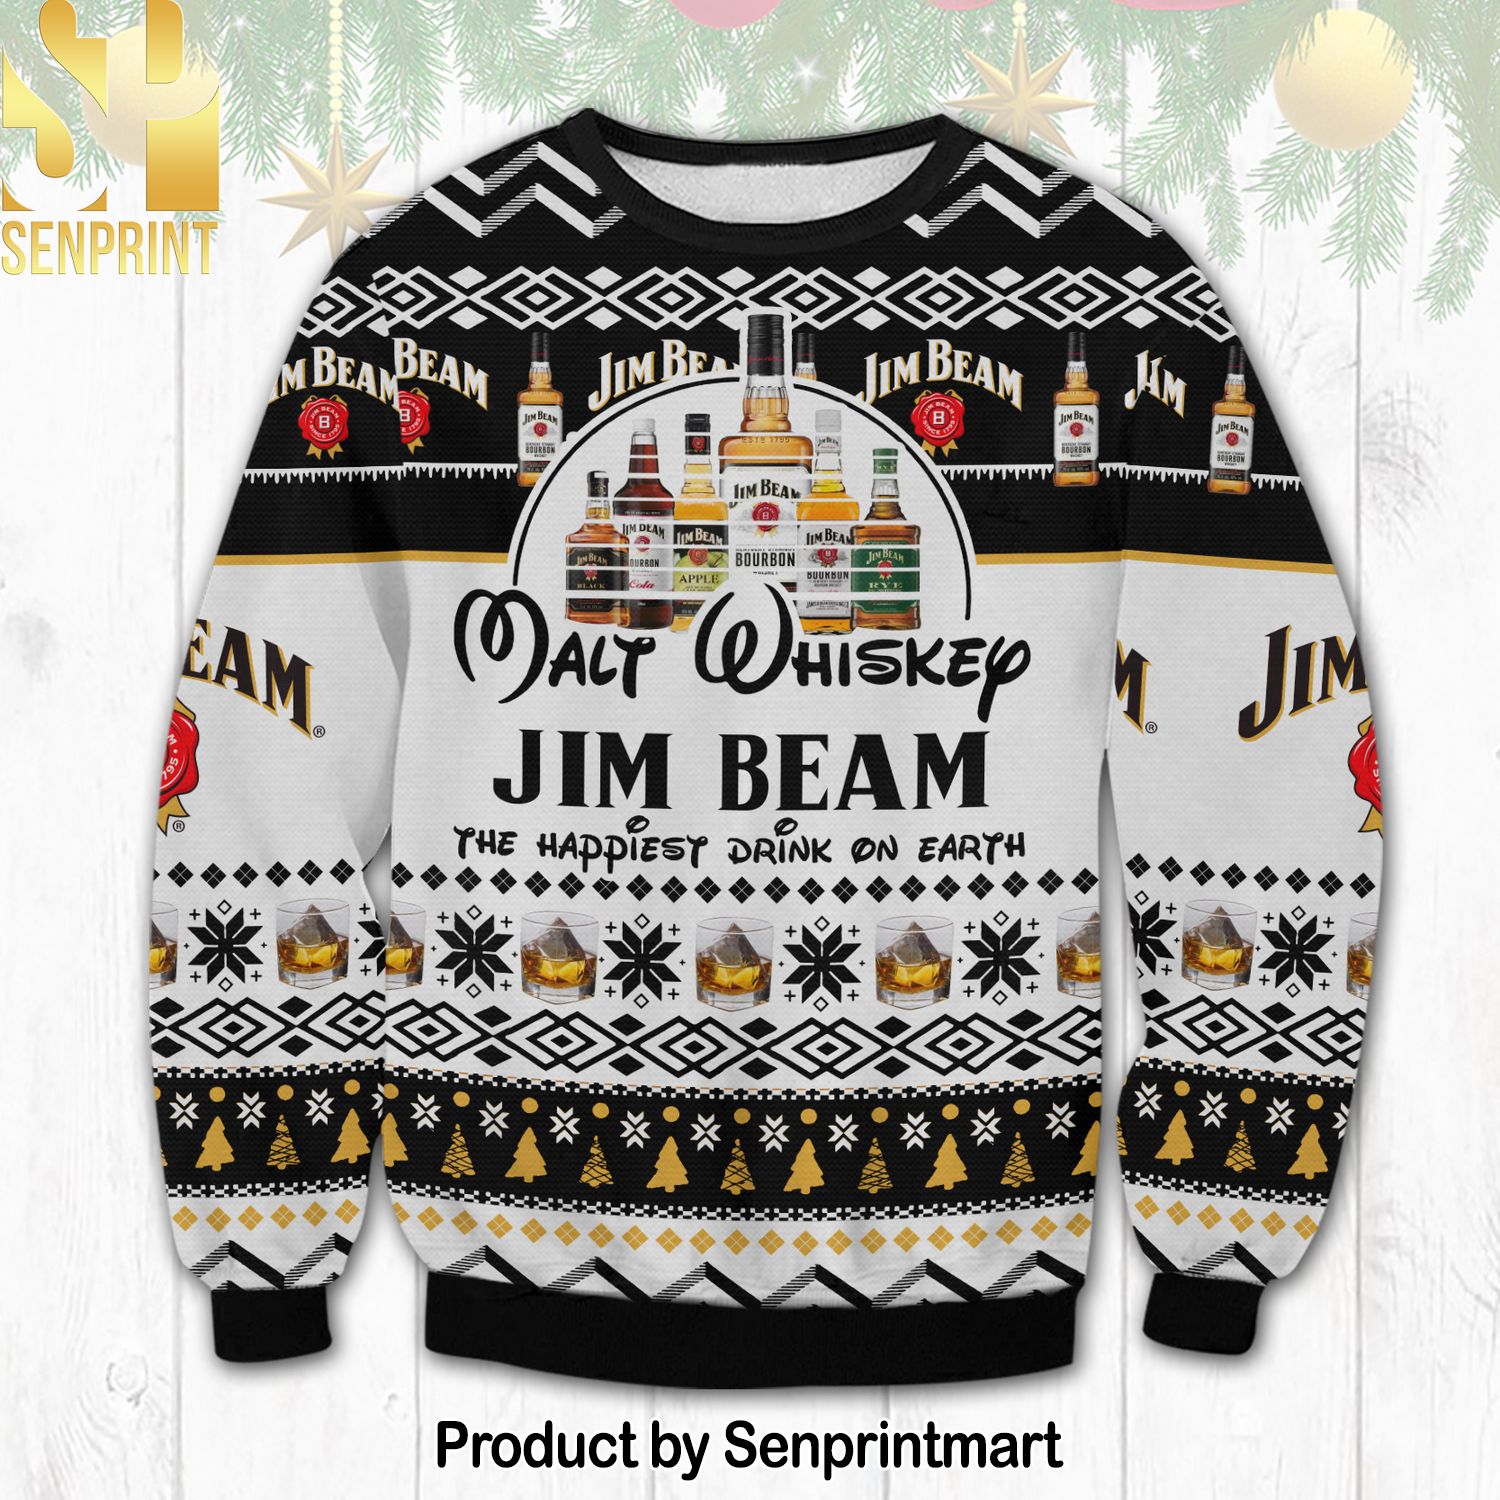 Jim Beam Happiest Drink For Christmas Gifts Knitting Pattern Sweater